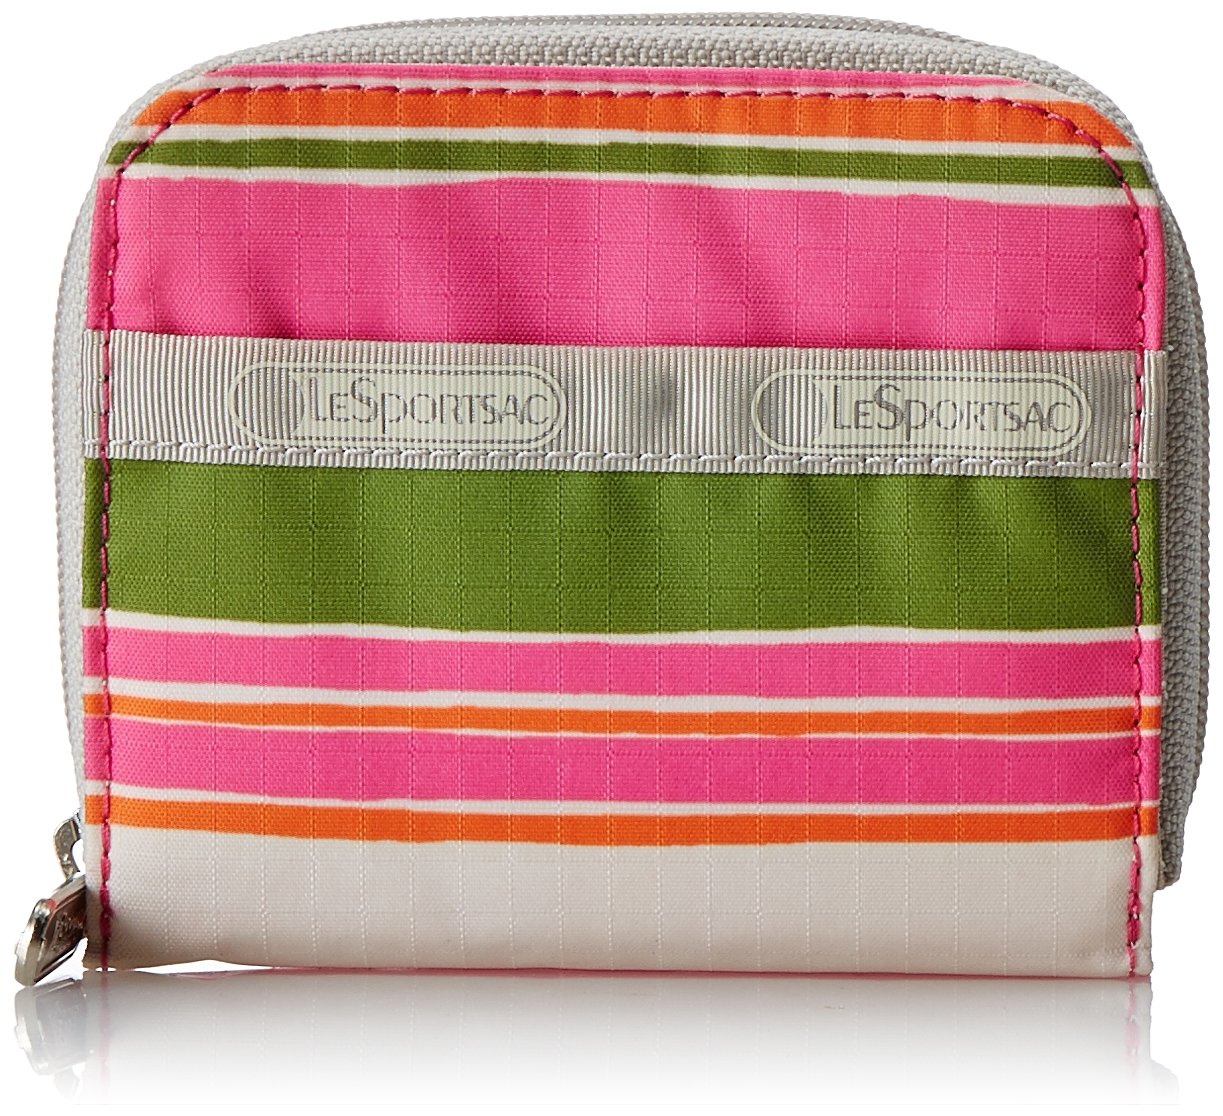 LeSportsac Classic Claire Wallet